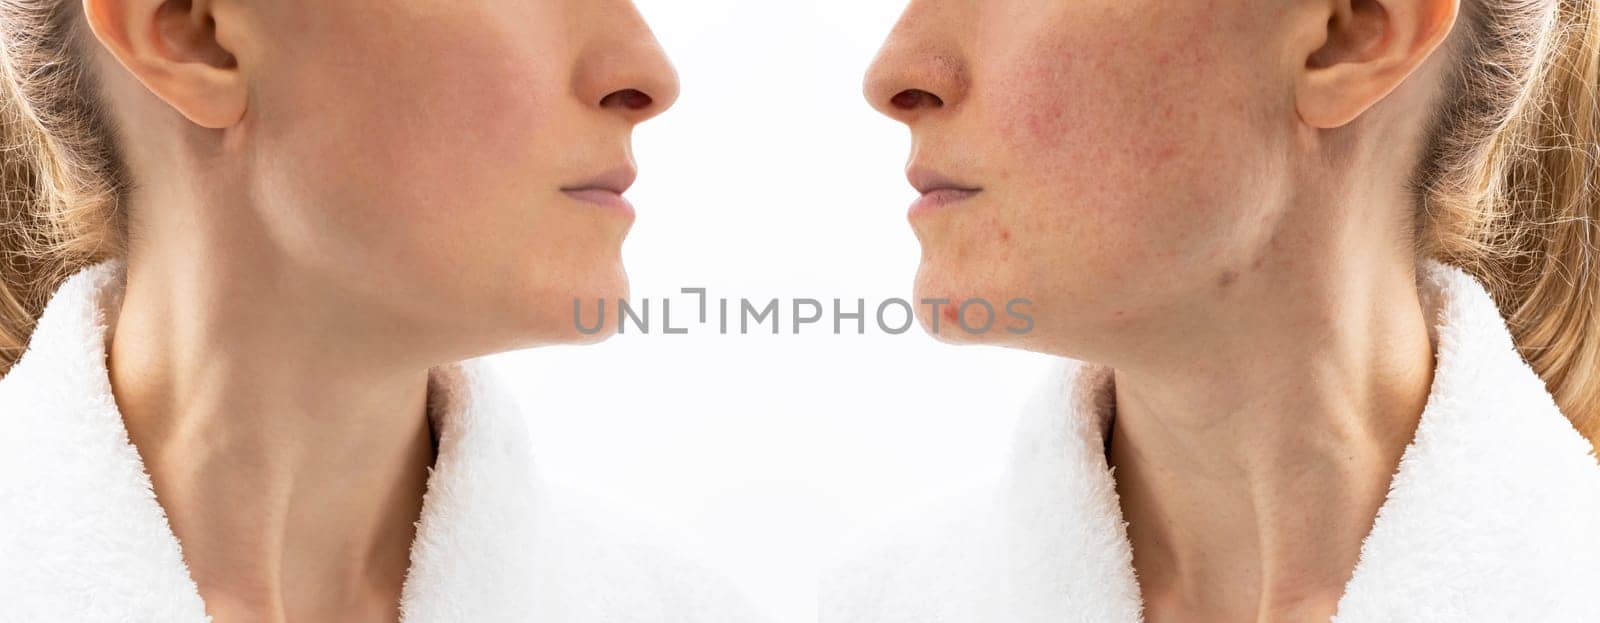 Before and After Skin Acne Treatment. Face of Woman in her 30s with Acne Problem, Couperosis, Scarring, Blackheads. Adult Skin Problem. Cosmetics and Healthcare, Beauty Concept. Rosacea. Horizontal by netatsi